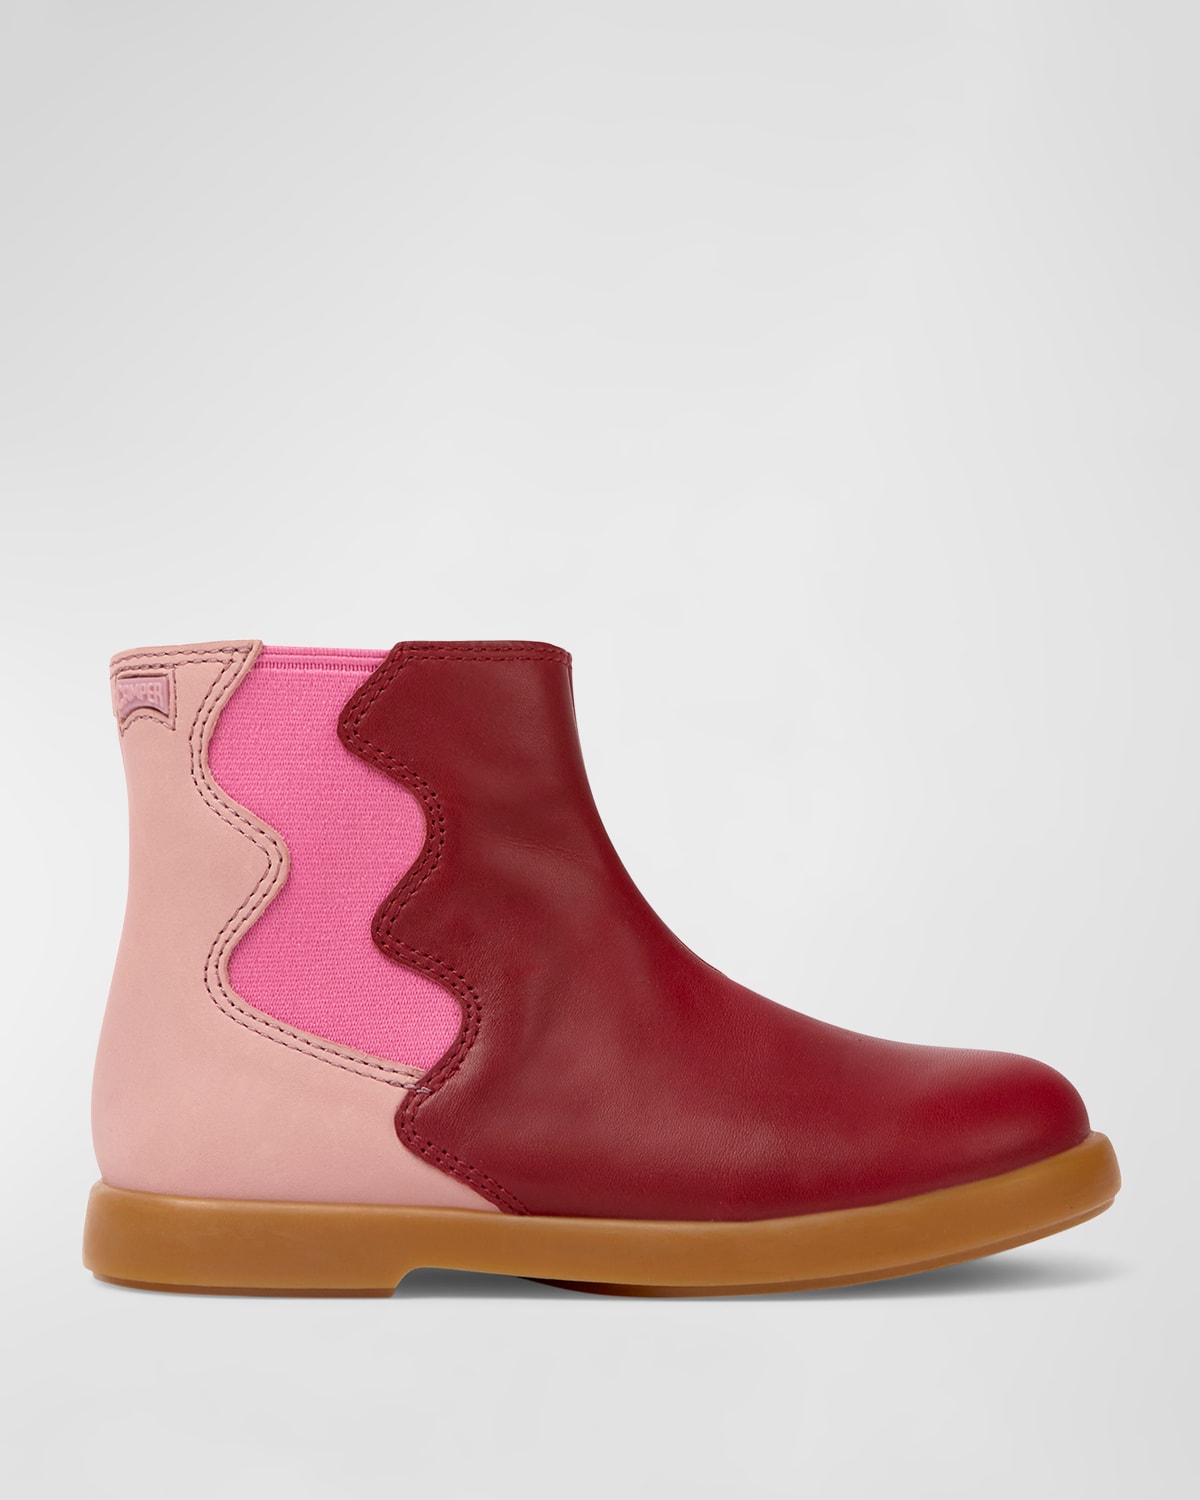 Camper Kid's Patent Leather Ankle Boots, Toddler/kids In Multicolor